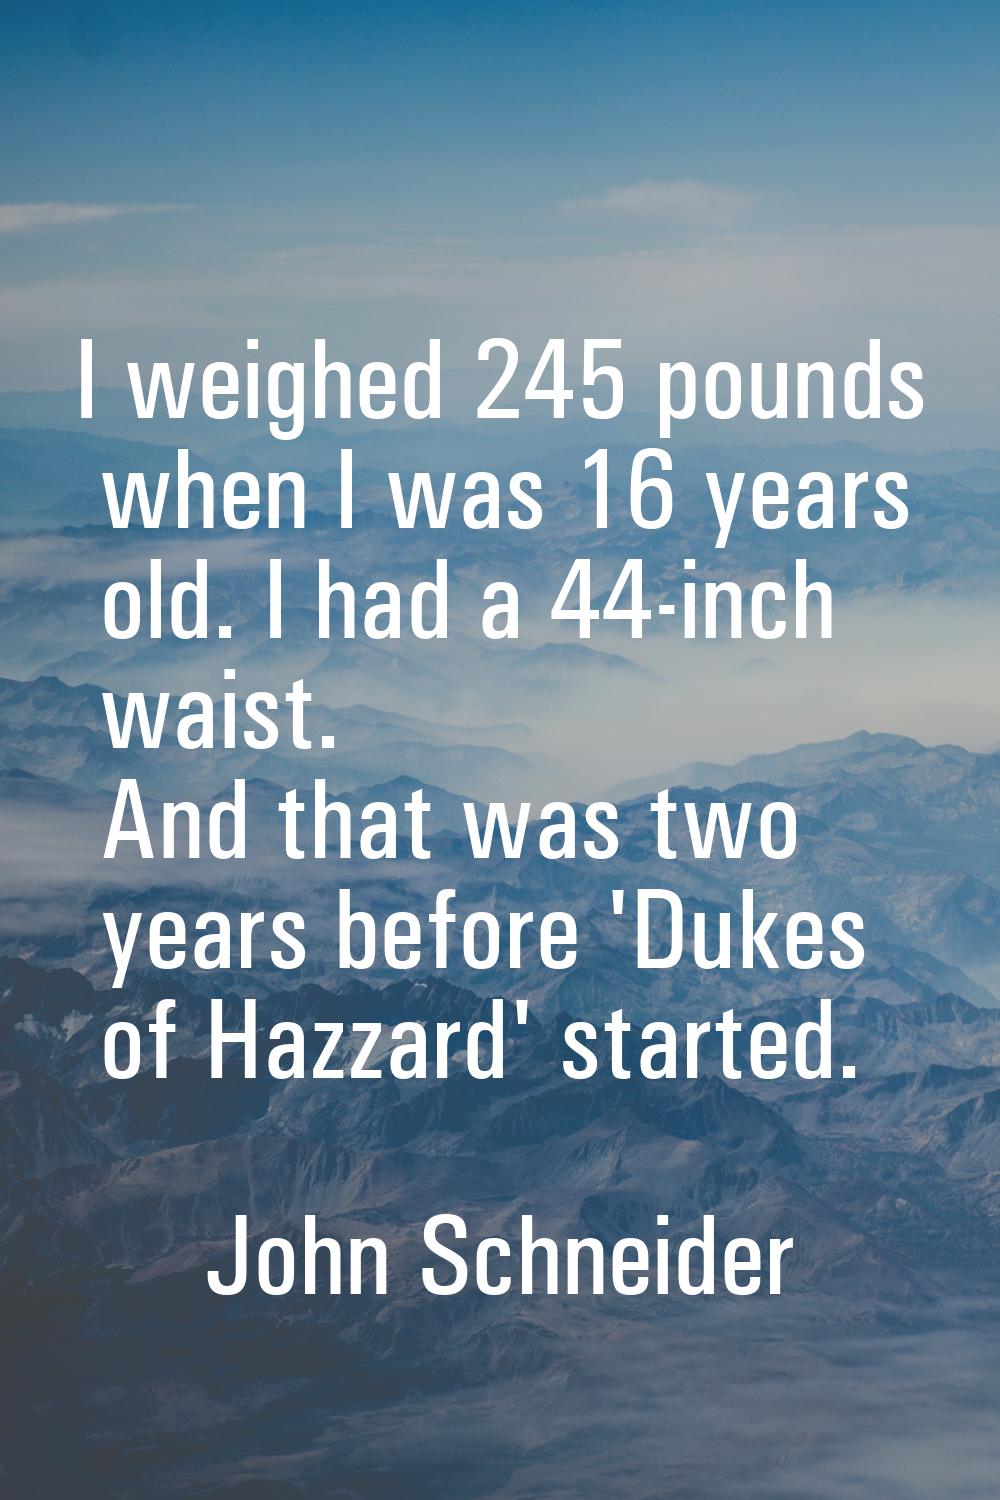 I weighed 245 pounds when I was 16 years old. I had a 44-inch waist. And that was two years before 